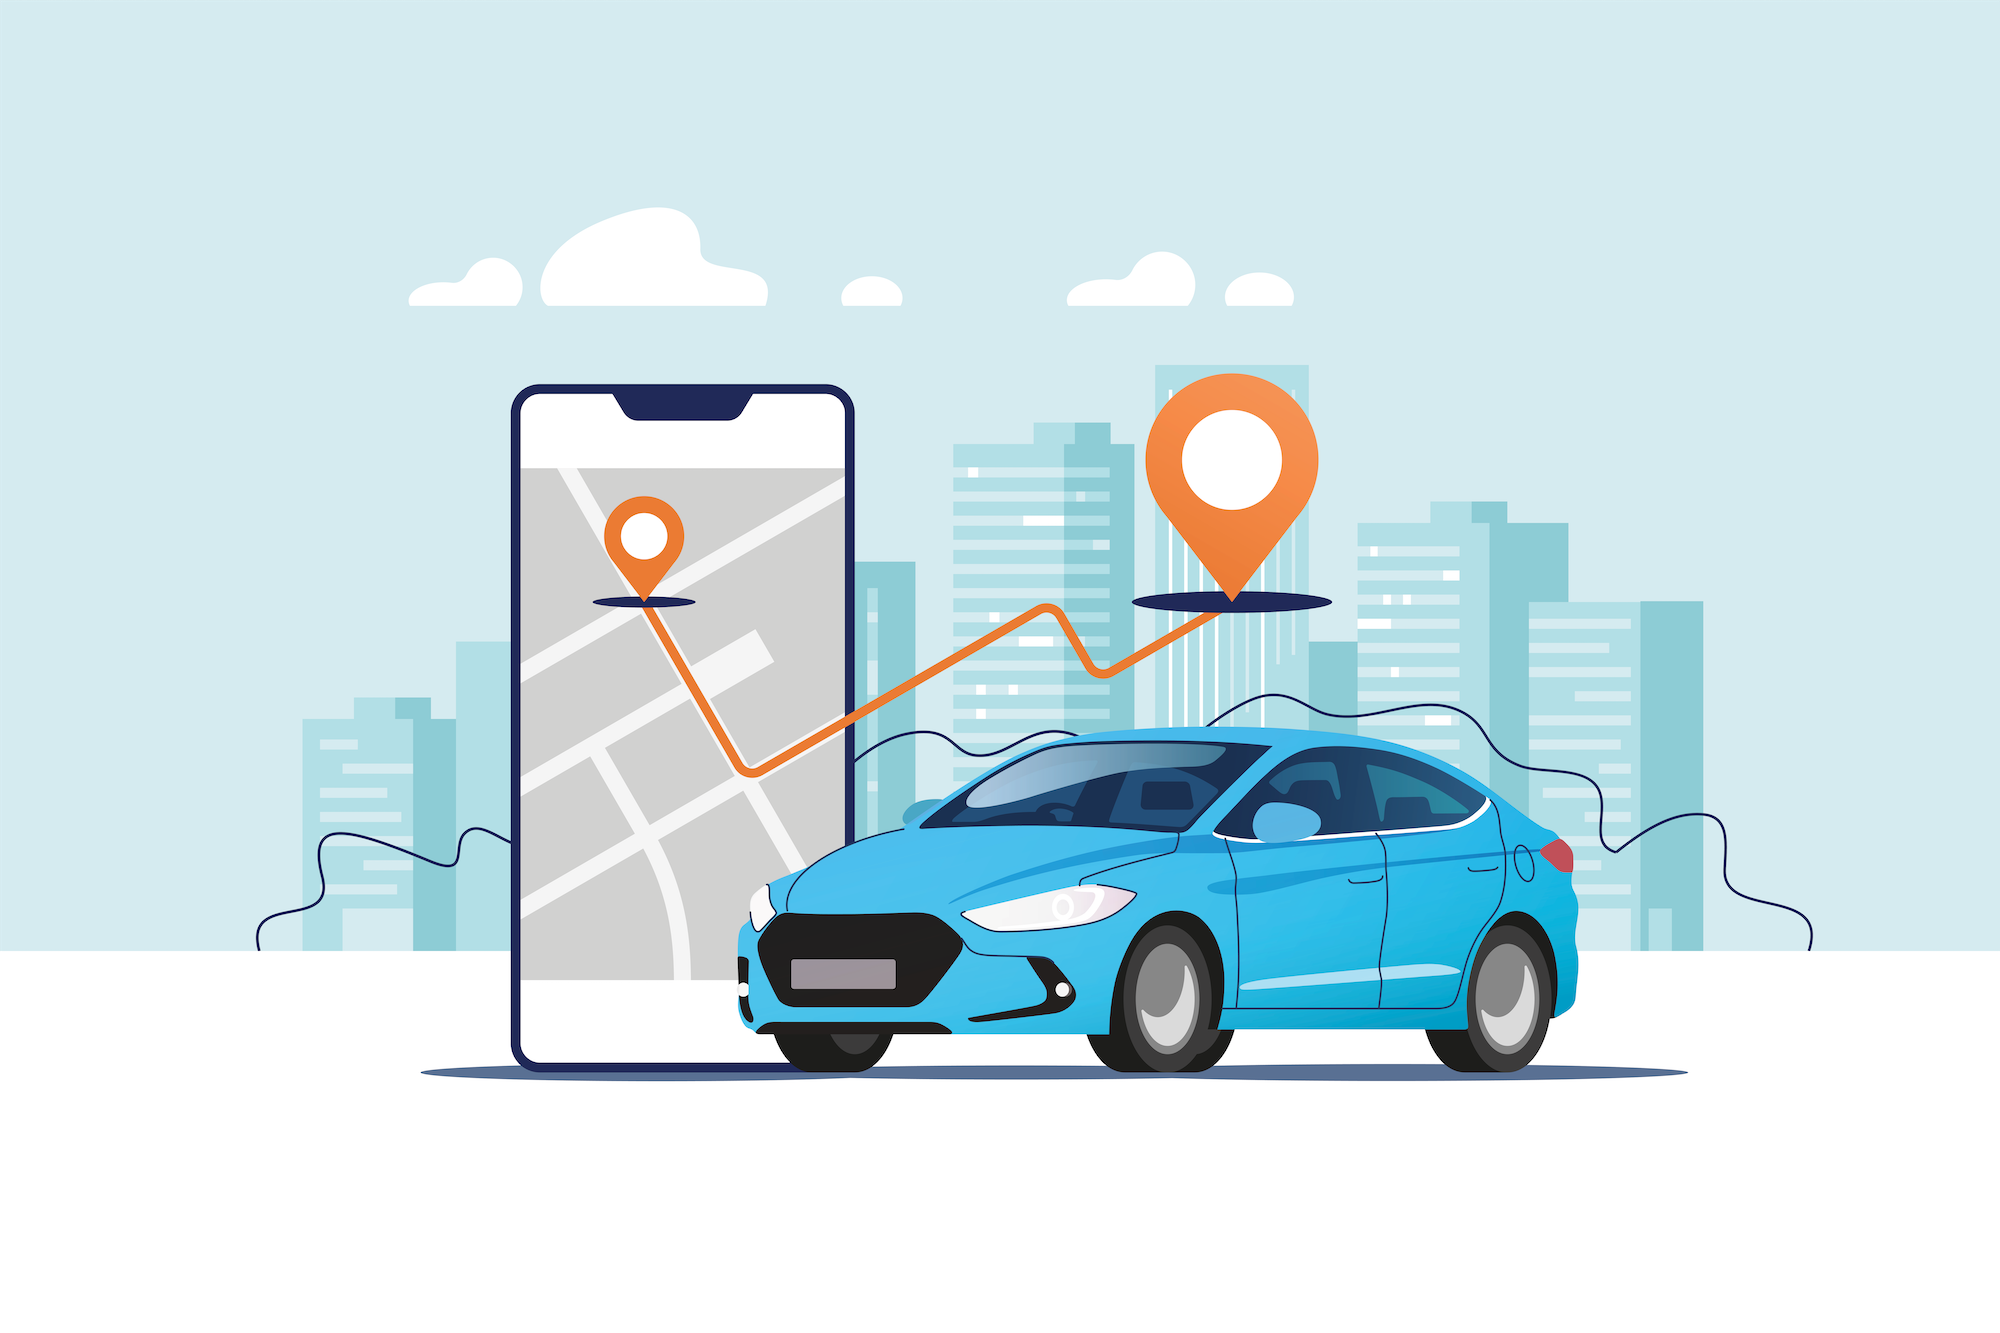 Machine learning speeds up vehicle routing